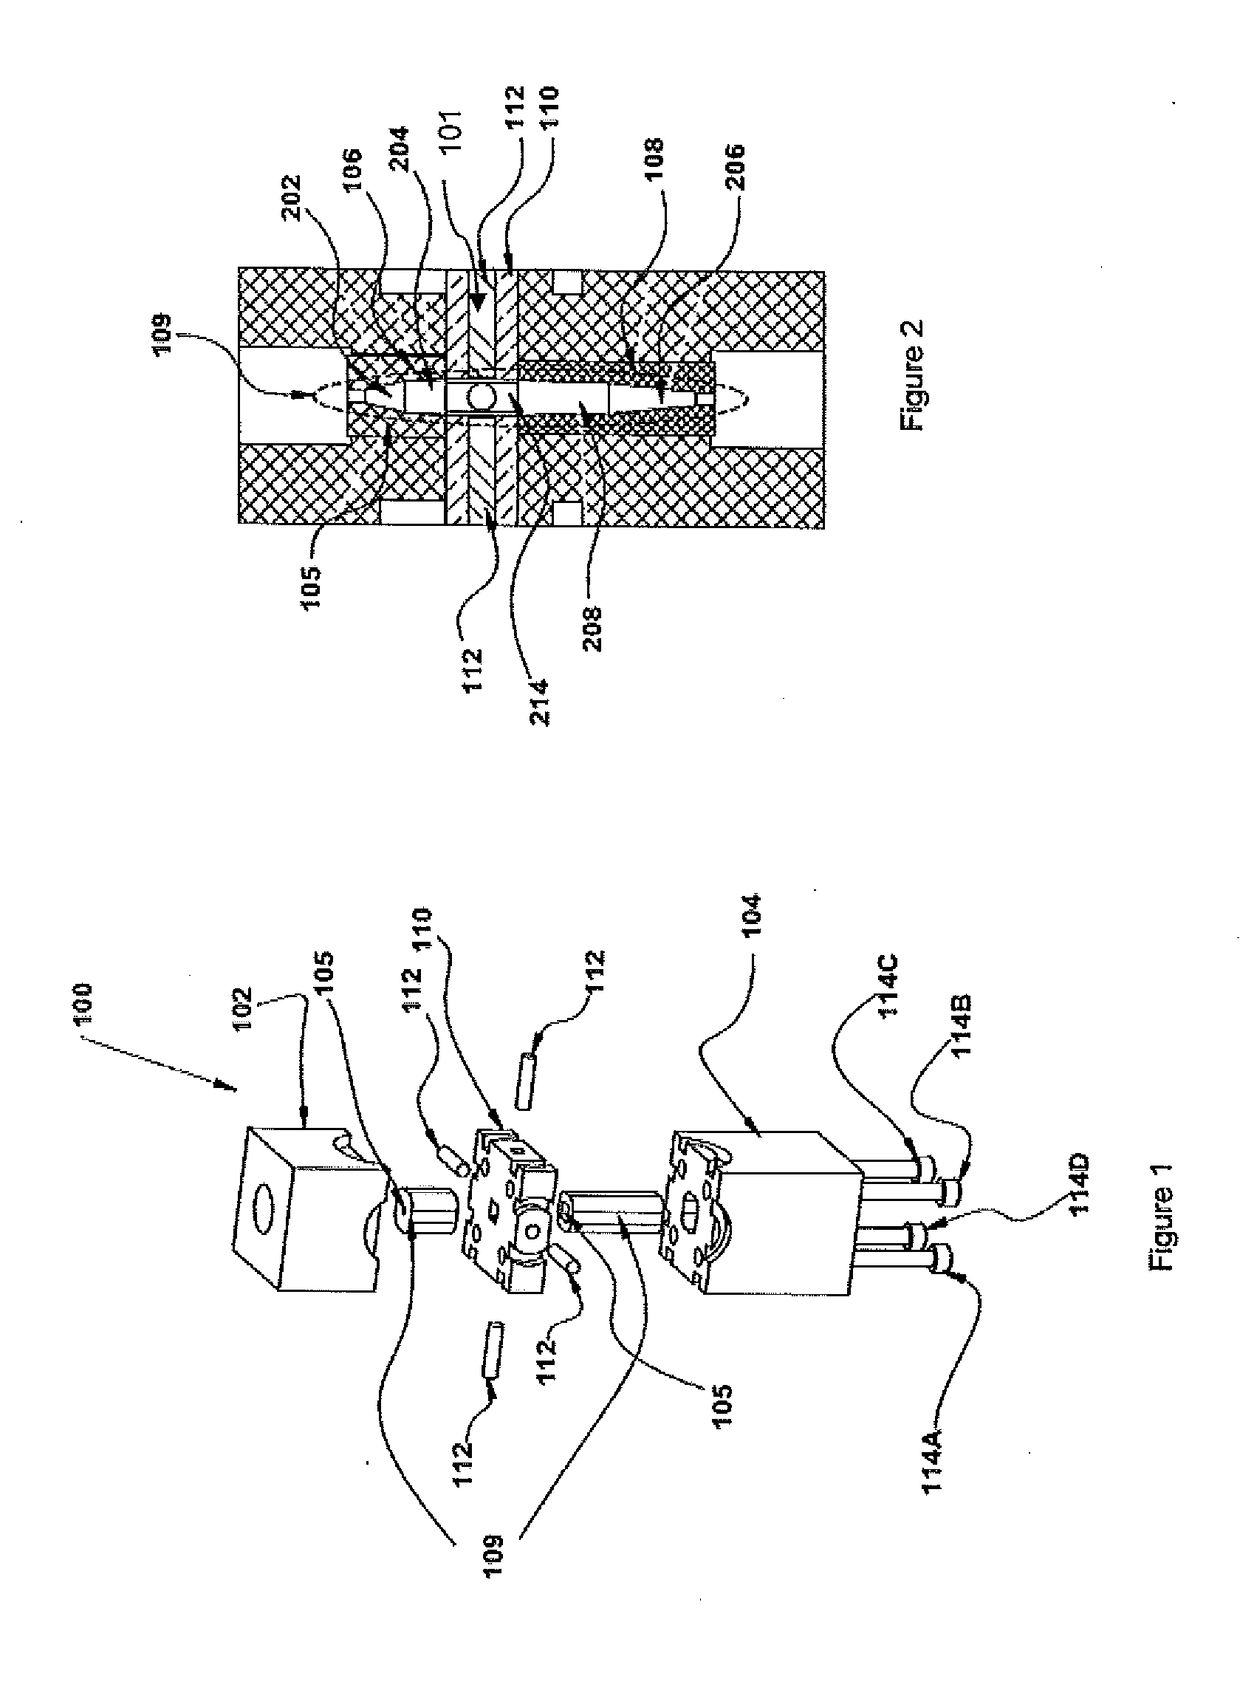 Flow cell and system for simultaneous measurement of absorbance and emission in a sample